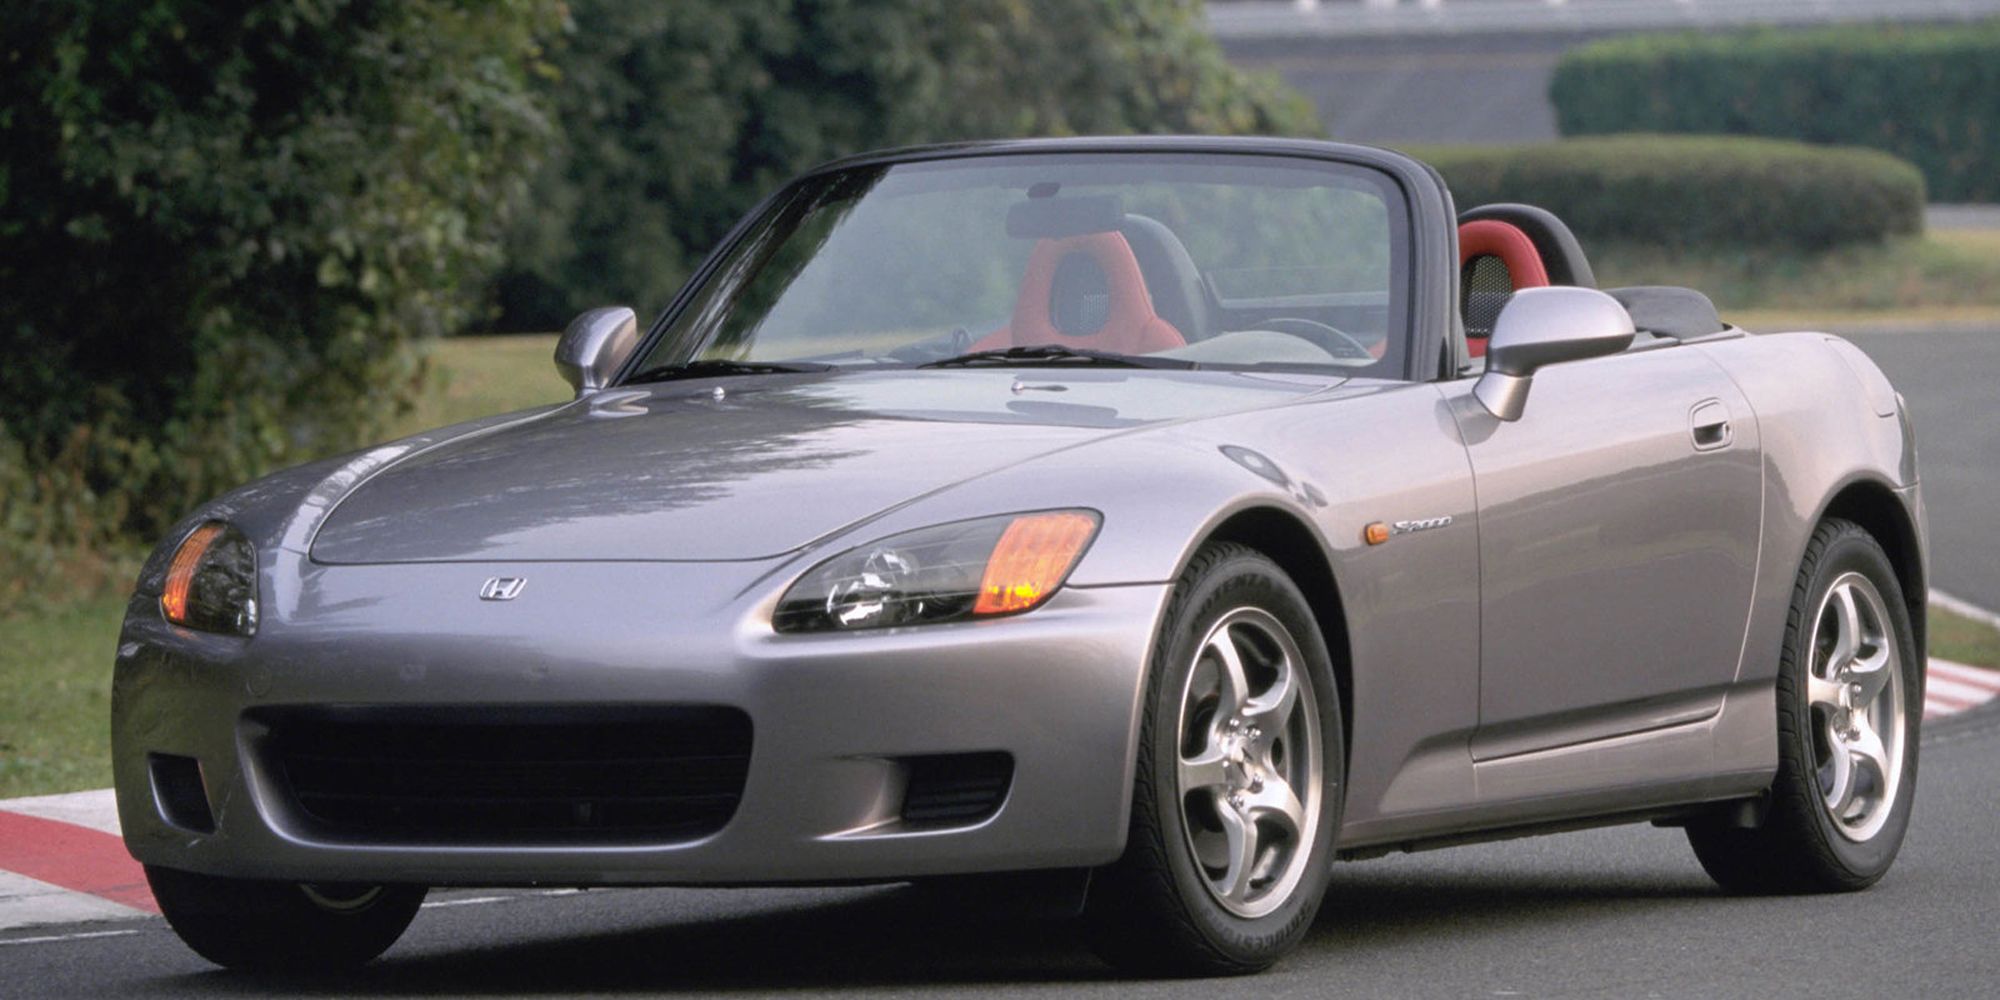 The front of a gray S2000 AP1, top down